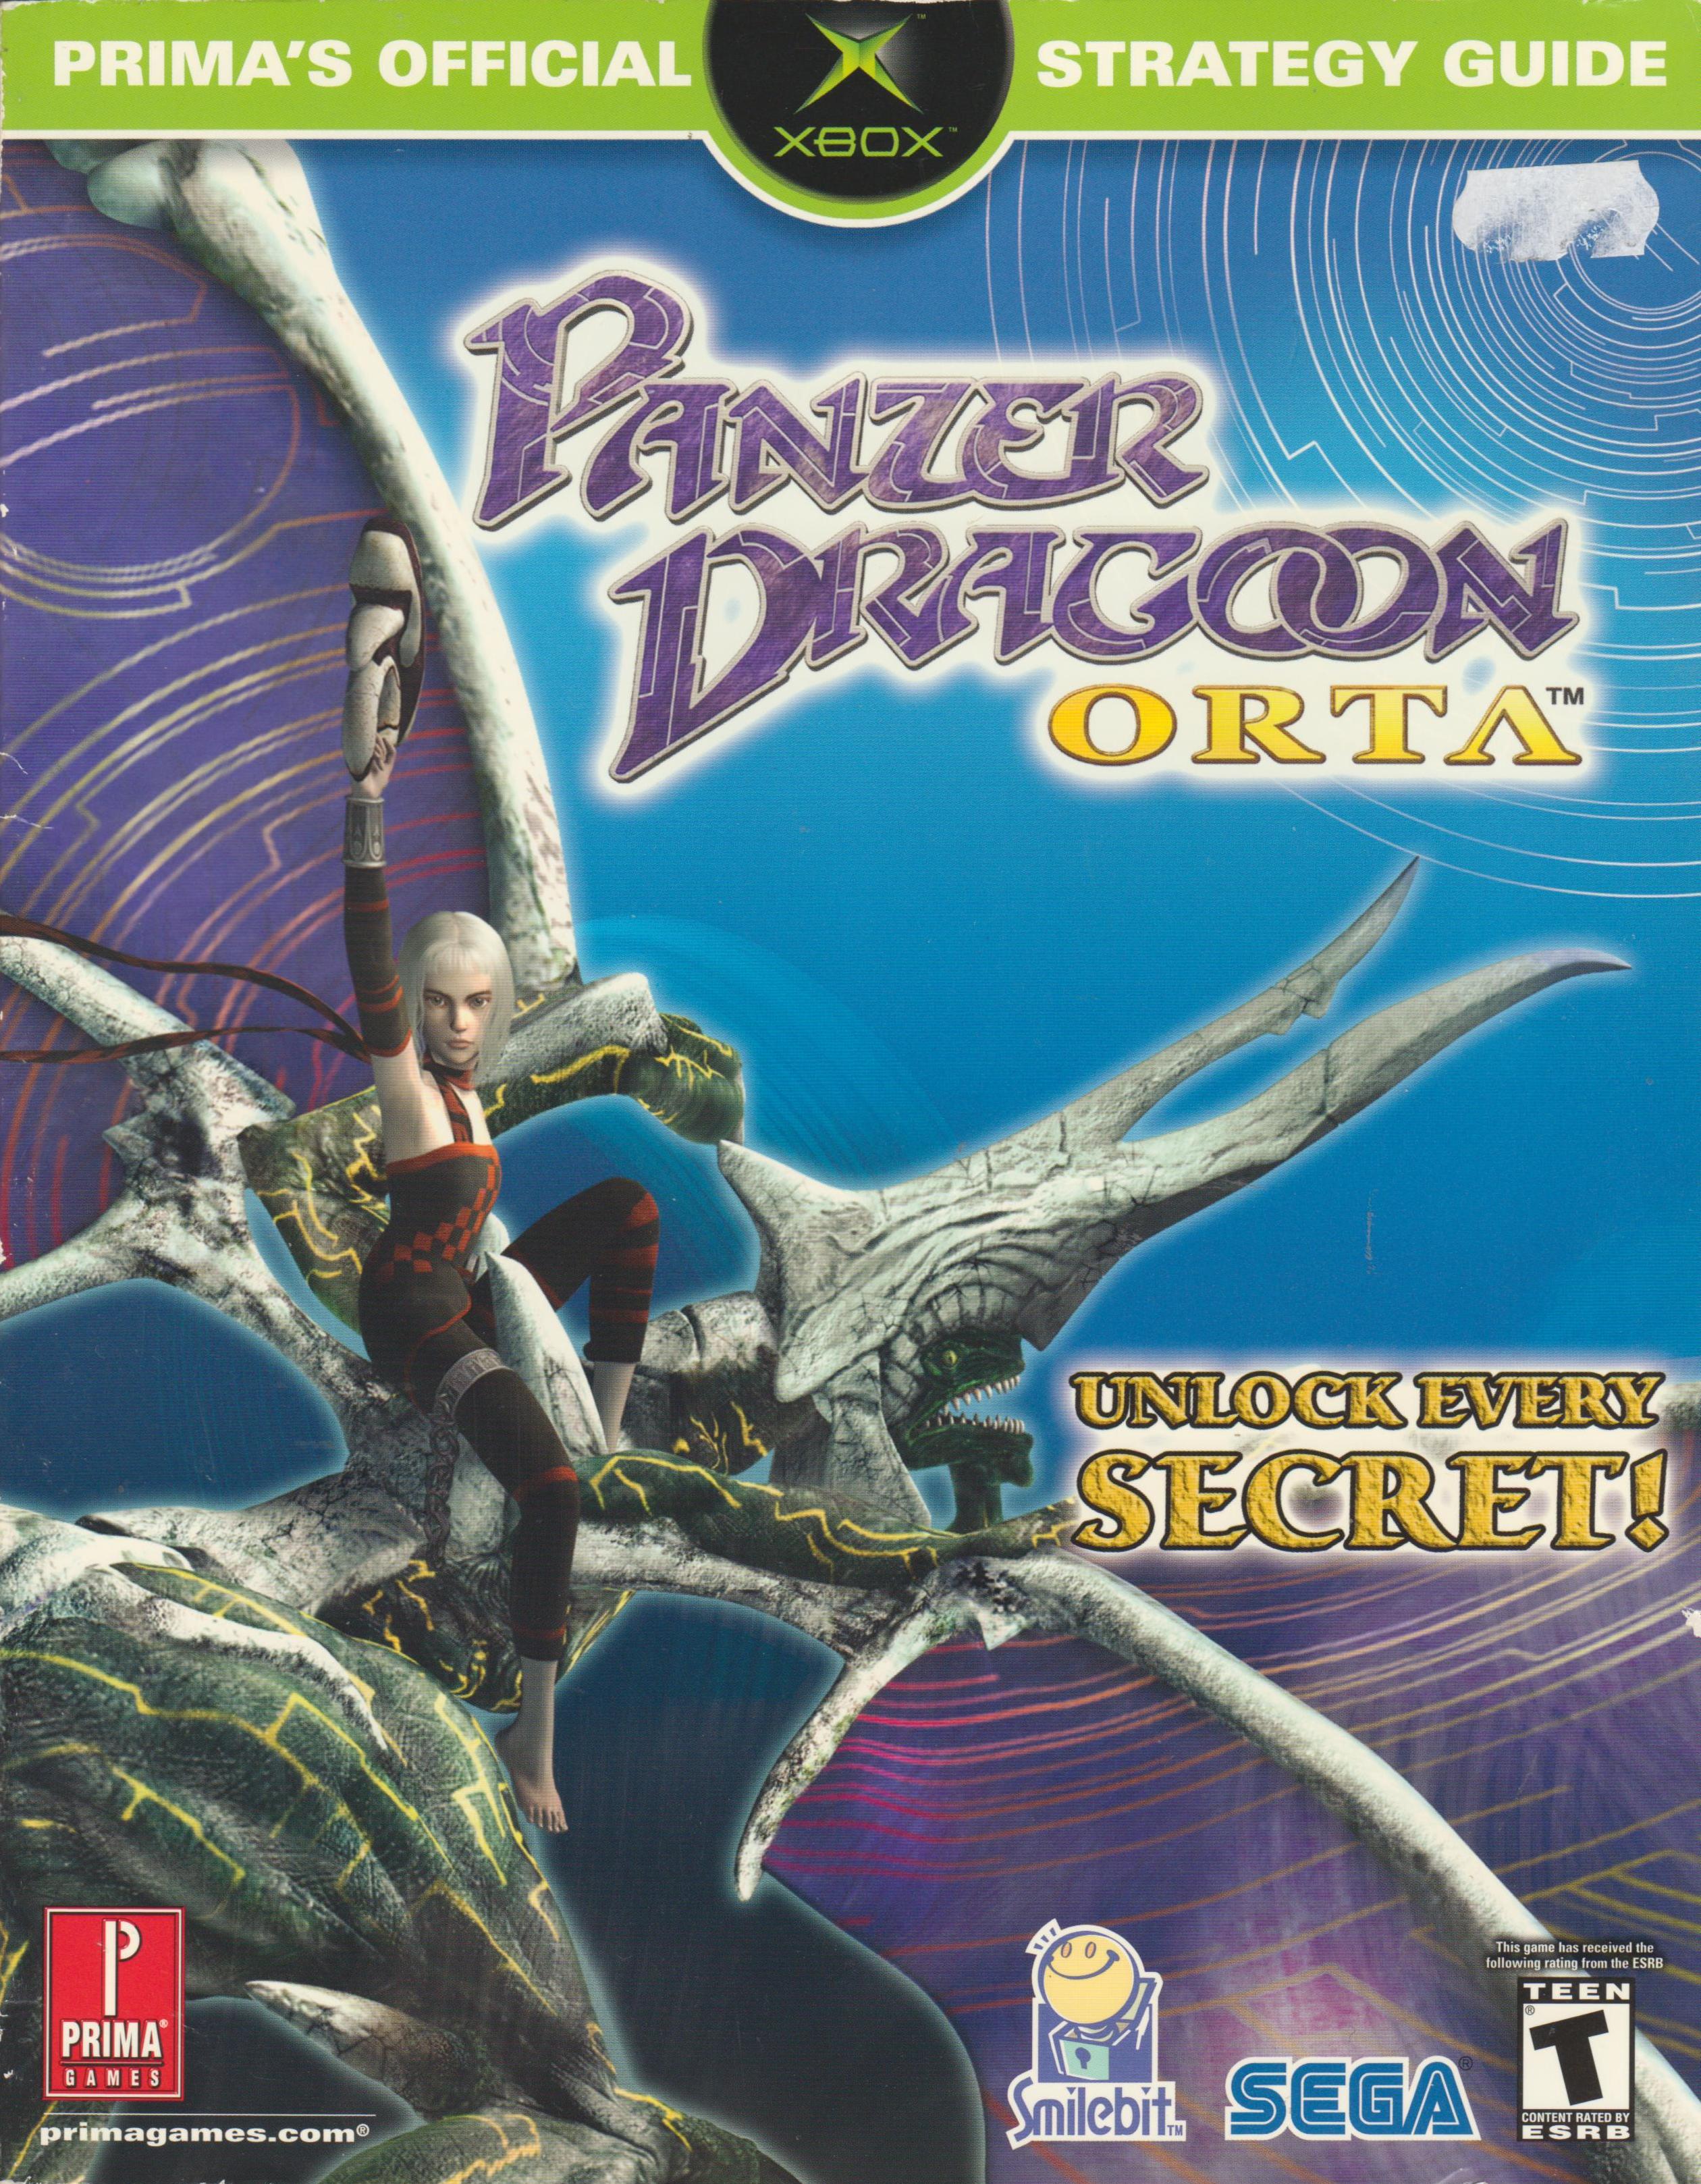 Panzer Dragoon Orta: Prima's Official Strategy Guide